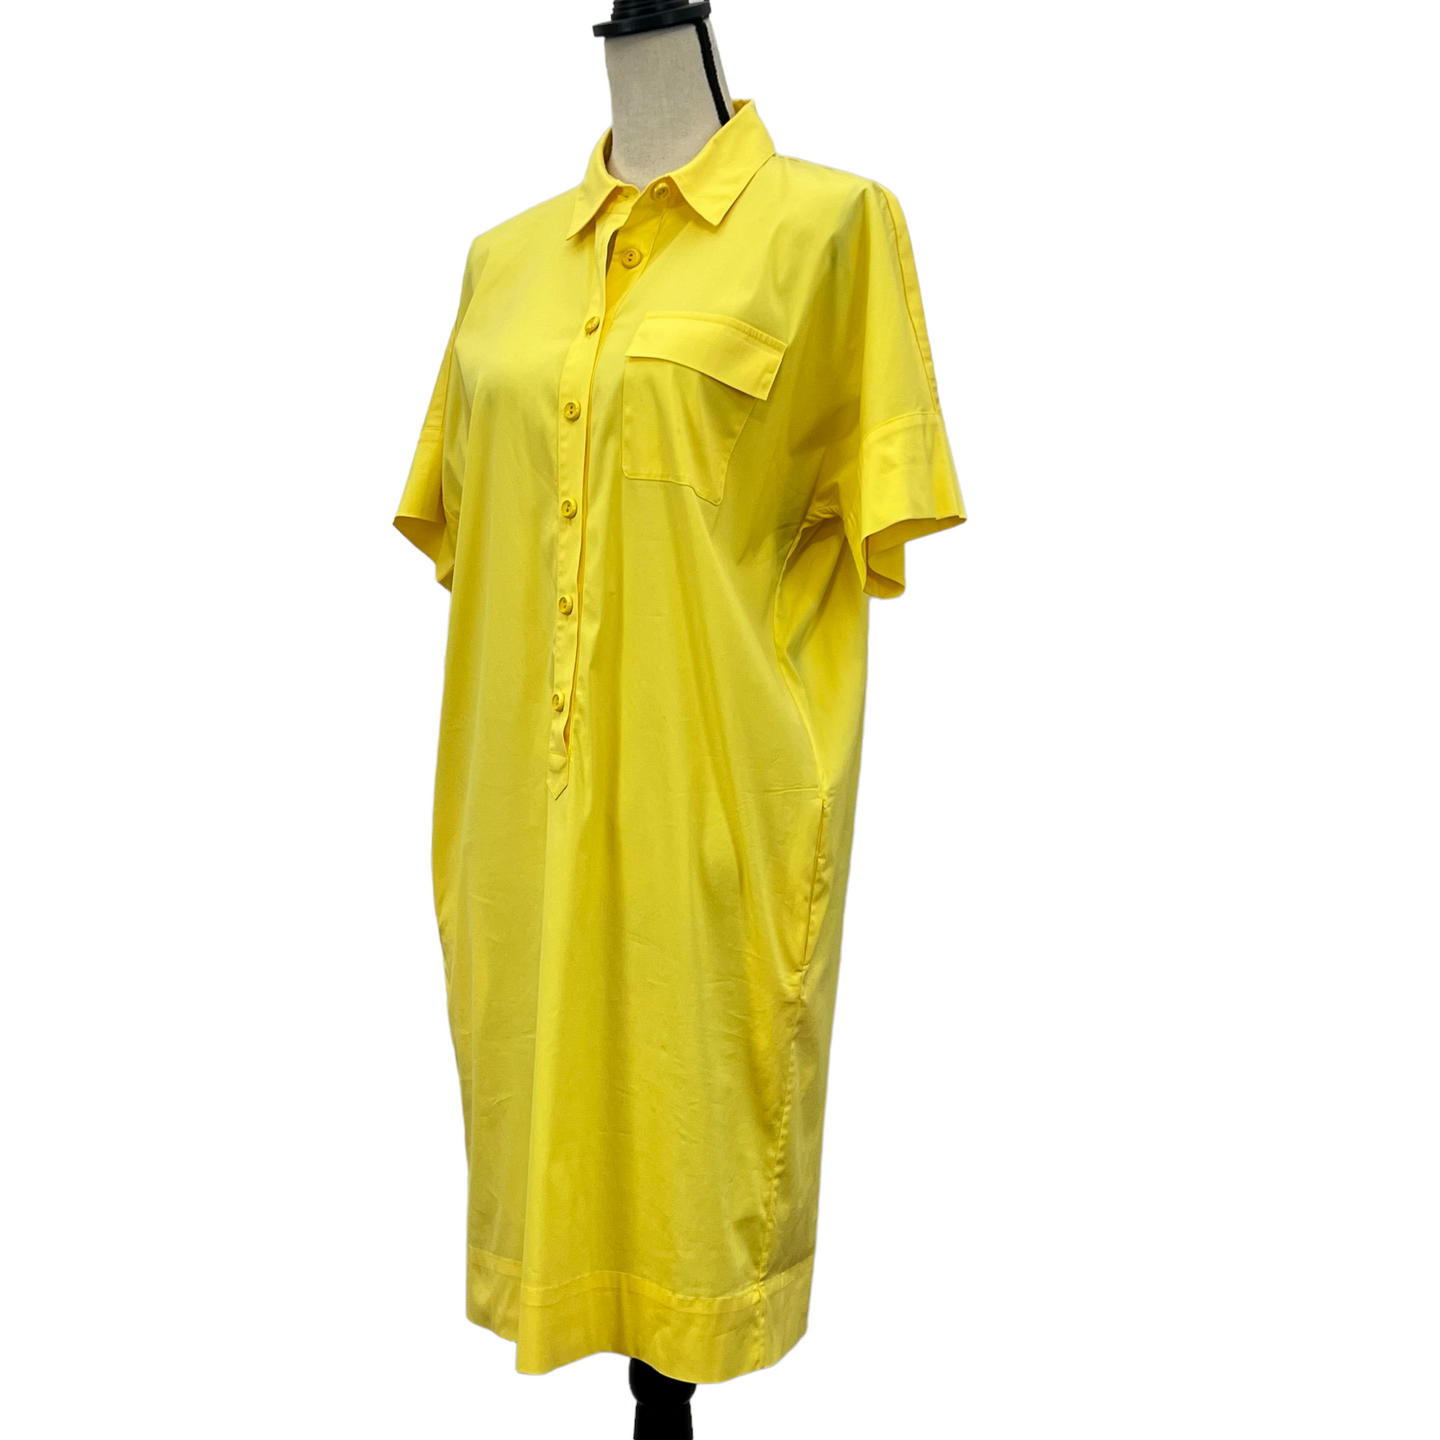 Vintage Yellow Shirtdress with Pockets Size Medium/Large Made in USA